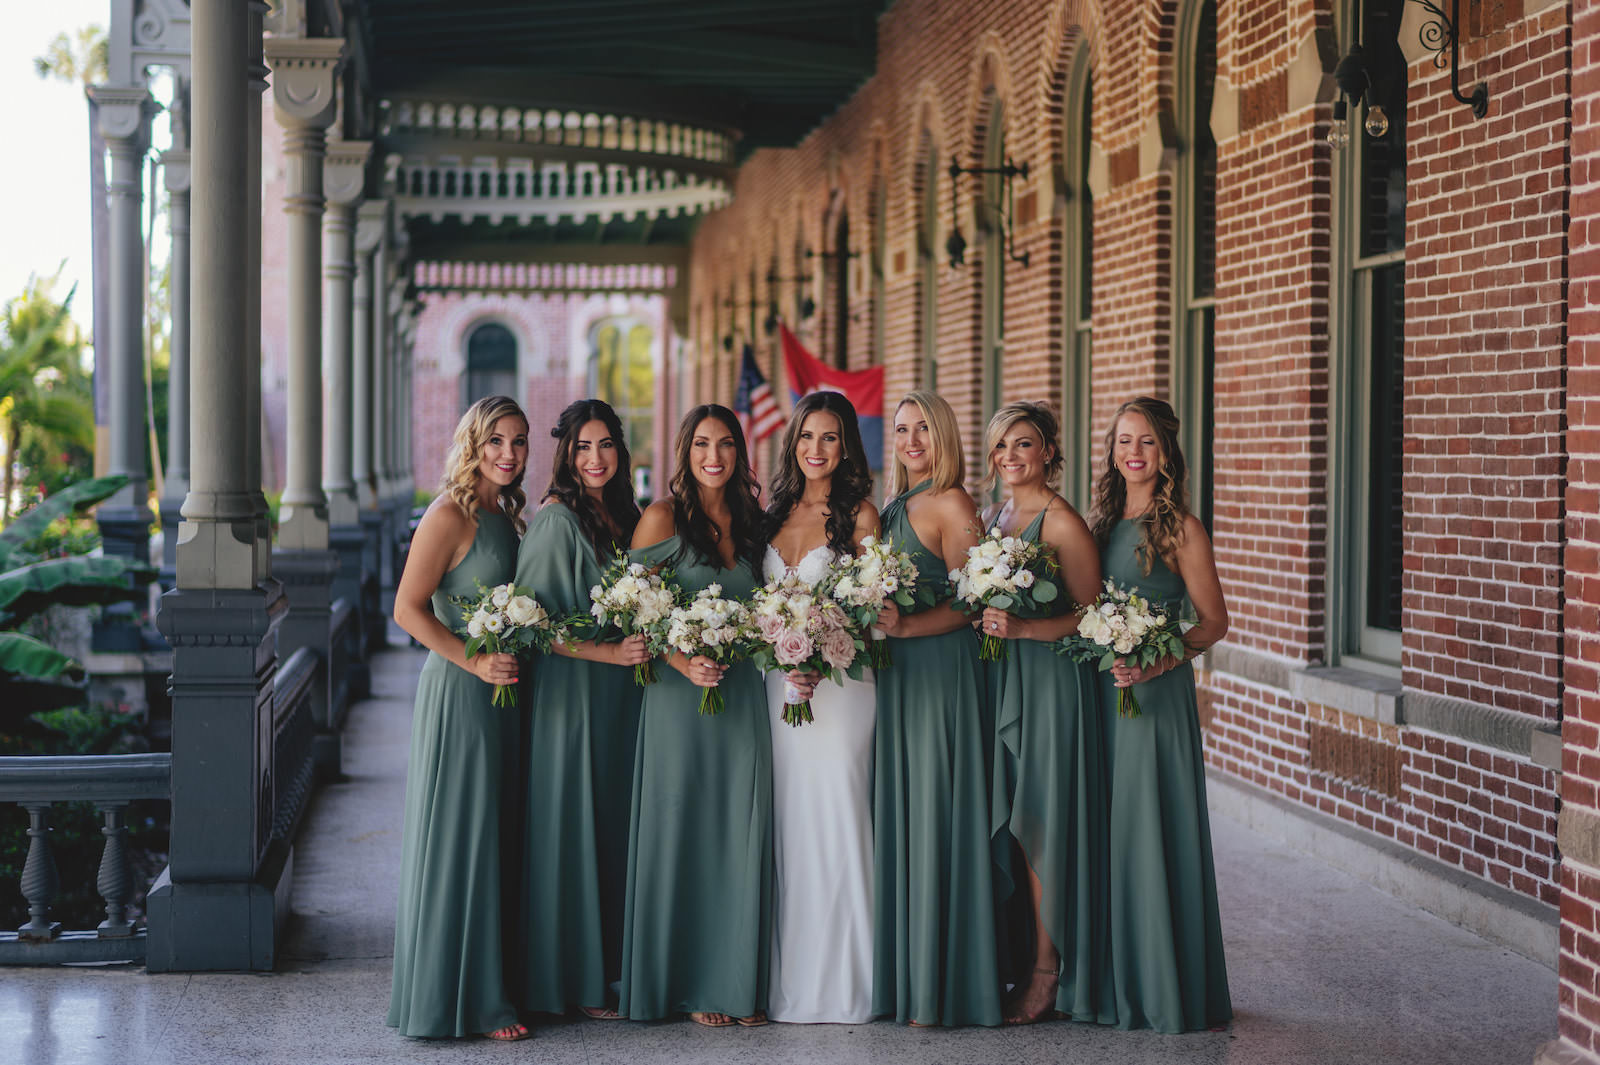 Modern Minimalist Bride and Bridesmaids Wearing Mix and Match Sage Green Dresses Holding White Floral and Greenery Bouquets | Tampa Bay Wedding Attire Bella Bridesmaids